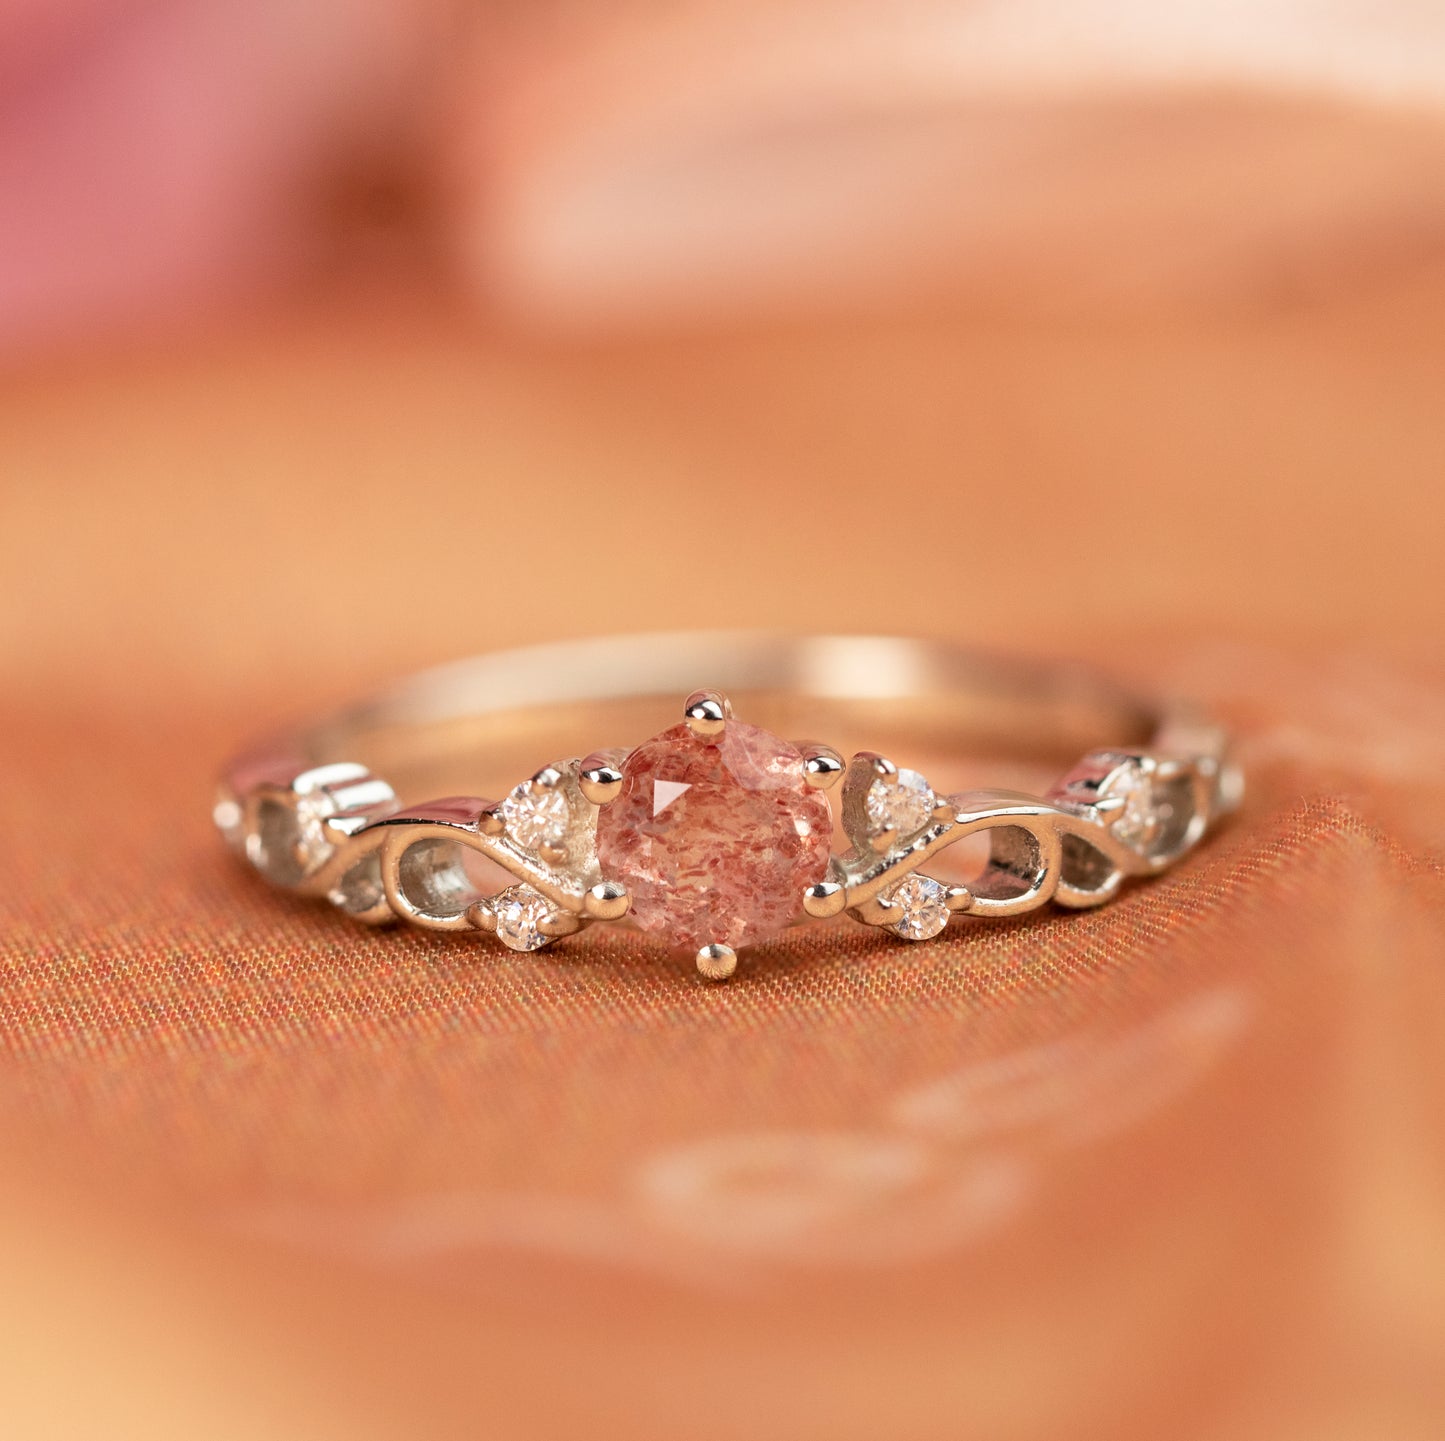 Dainty Vintage 0.6 carat Round Shaped Strawberry Quartz Tiara Crown Ring for Her in White Gold